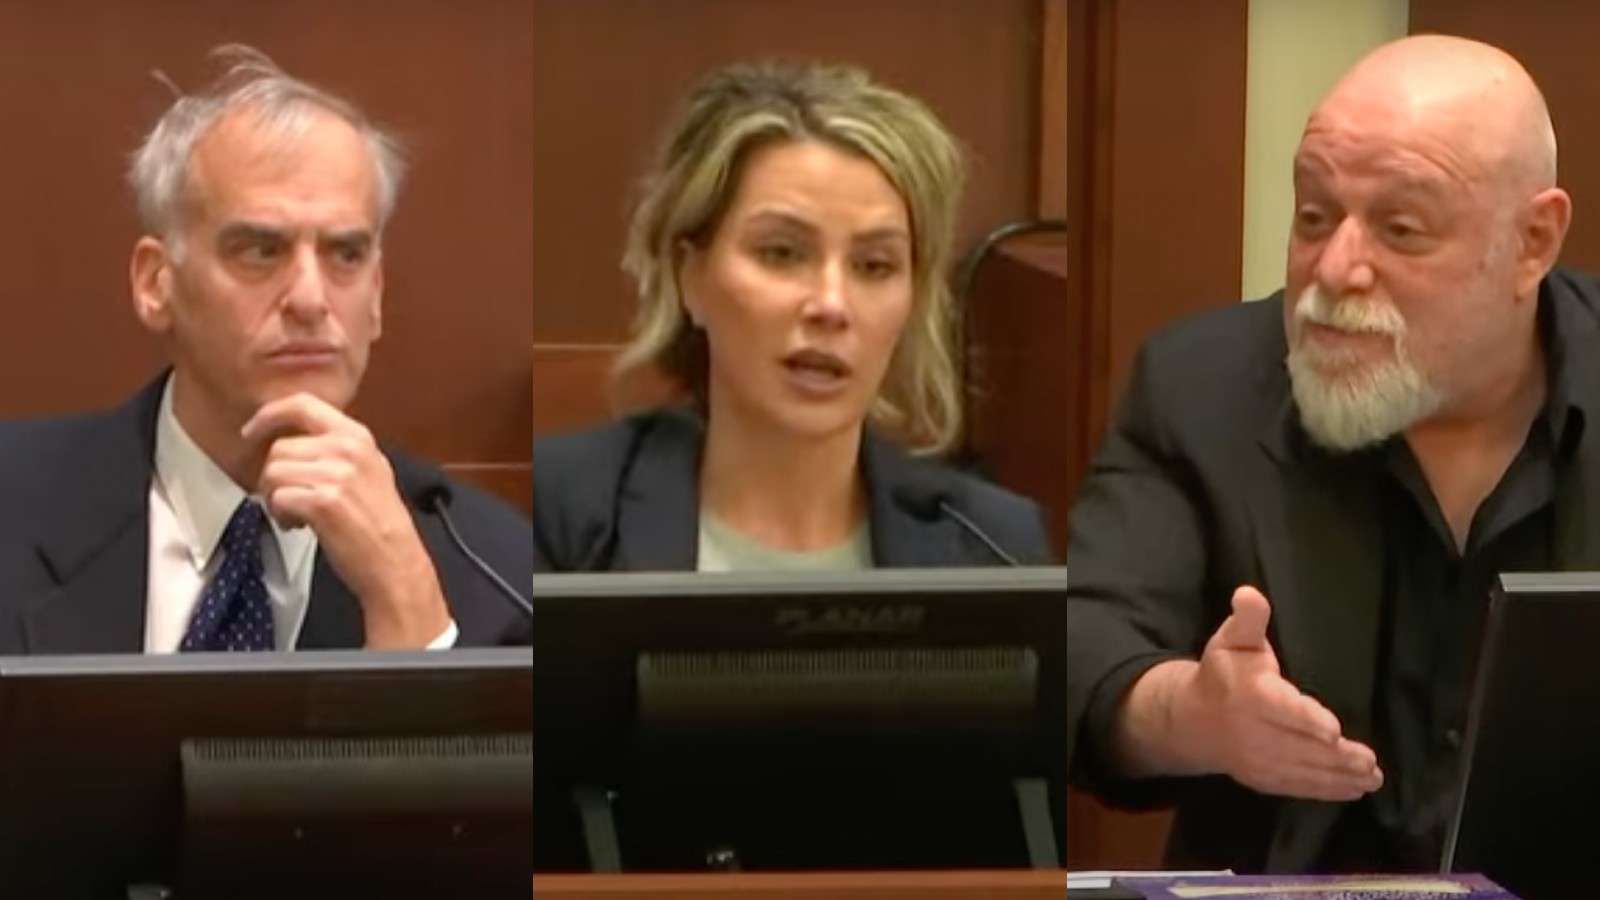 David Spiegel, Shannon Curry, and Isaac Baruch at Depp v Heard trial